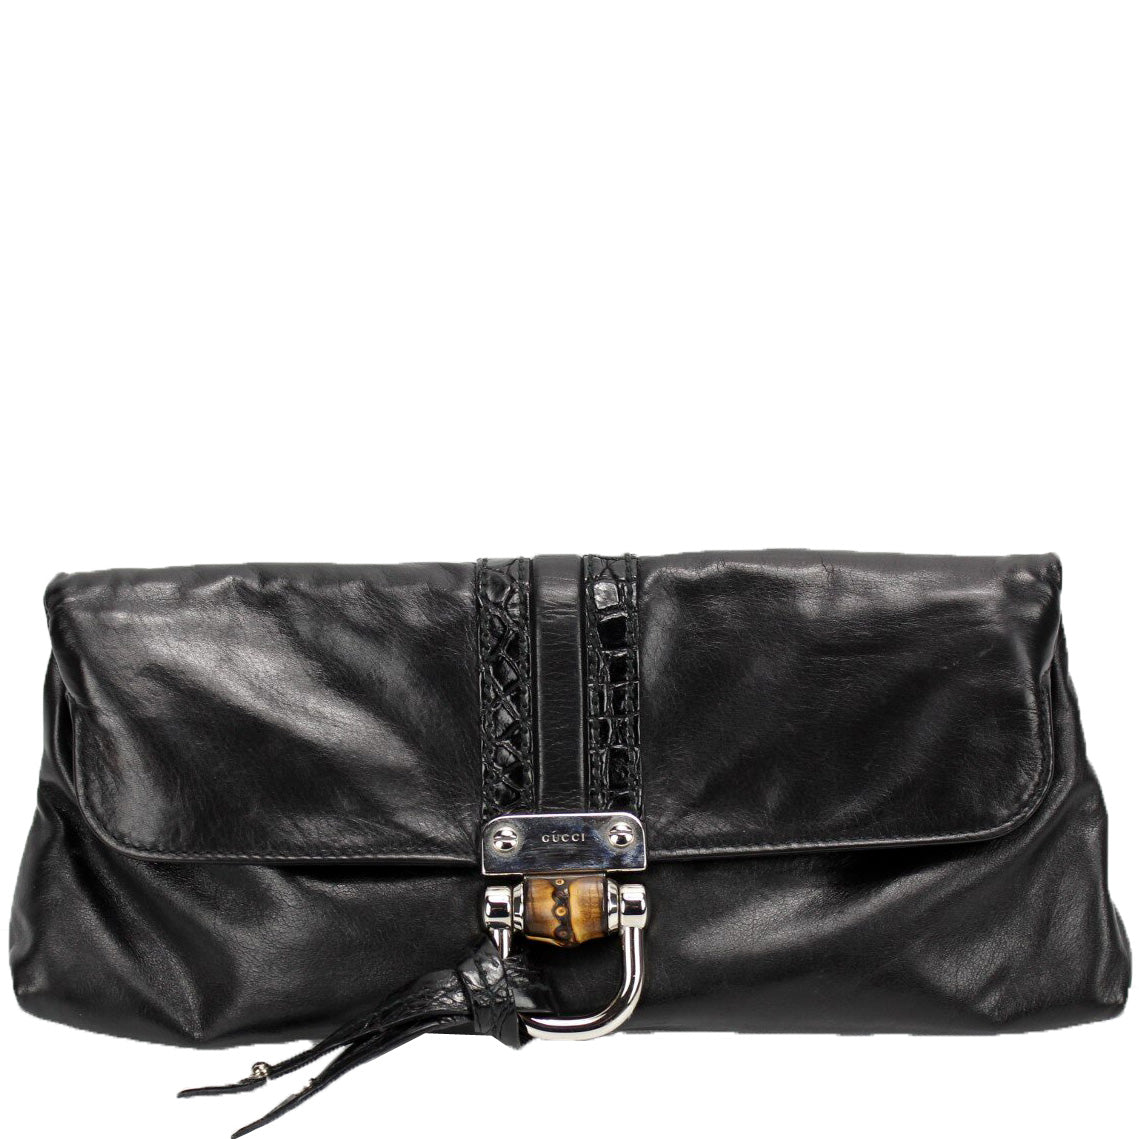 Gucci Black Leather Croisette Bamboo Evening Bag 